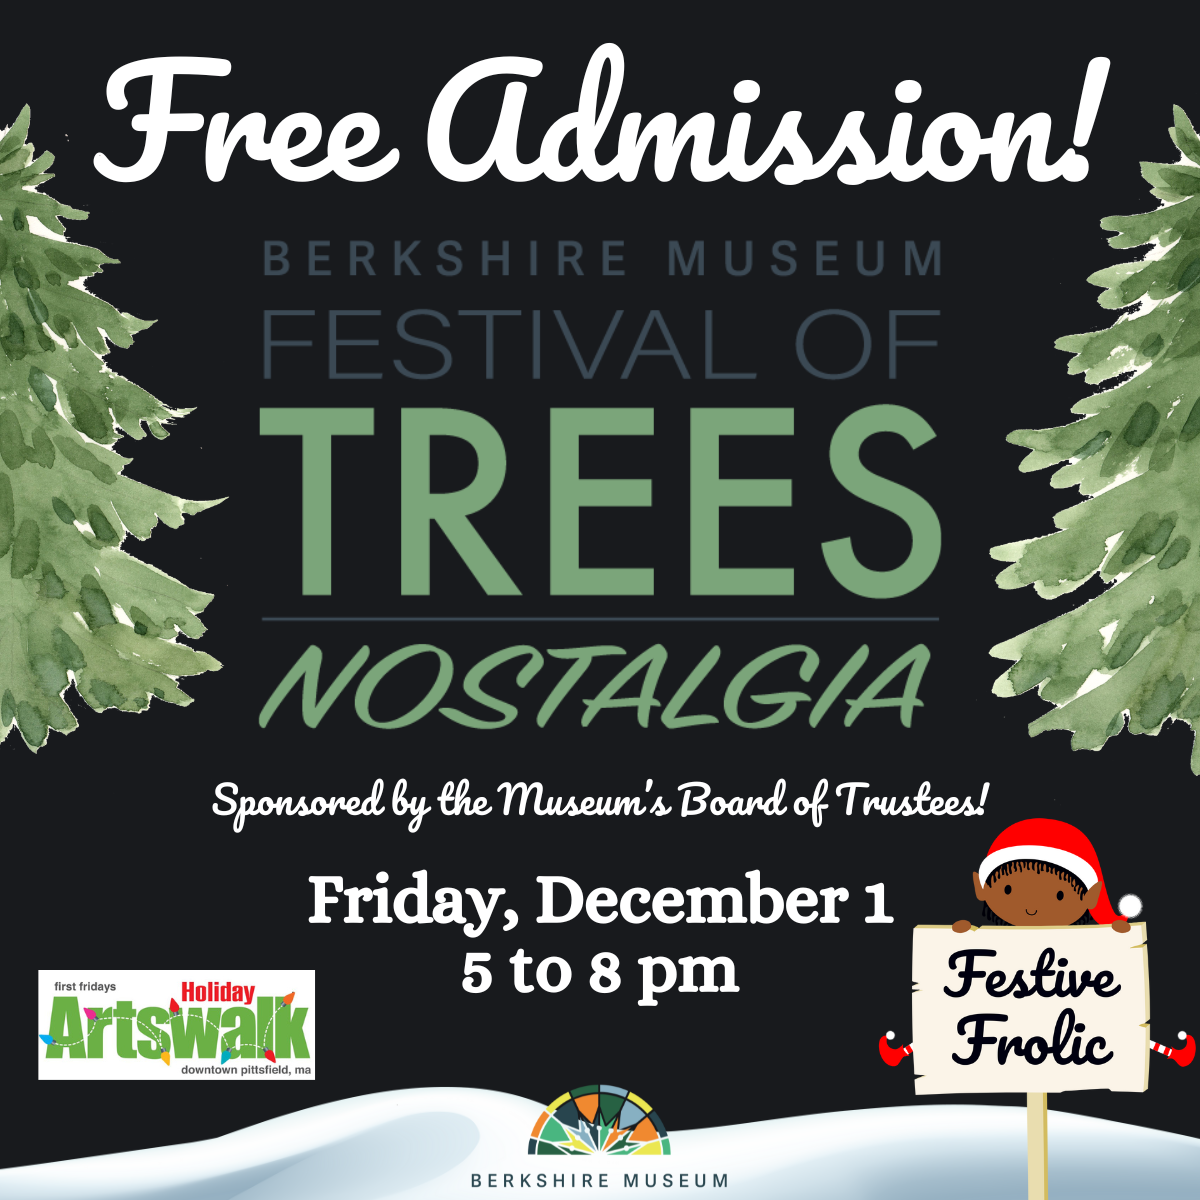 The Berkshire Museum will offer free admission to the Festival of Trees: Nostalgia on Friday, December 1, 2023, 5 to 8 pm.